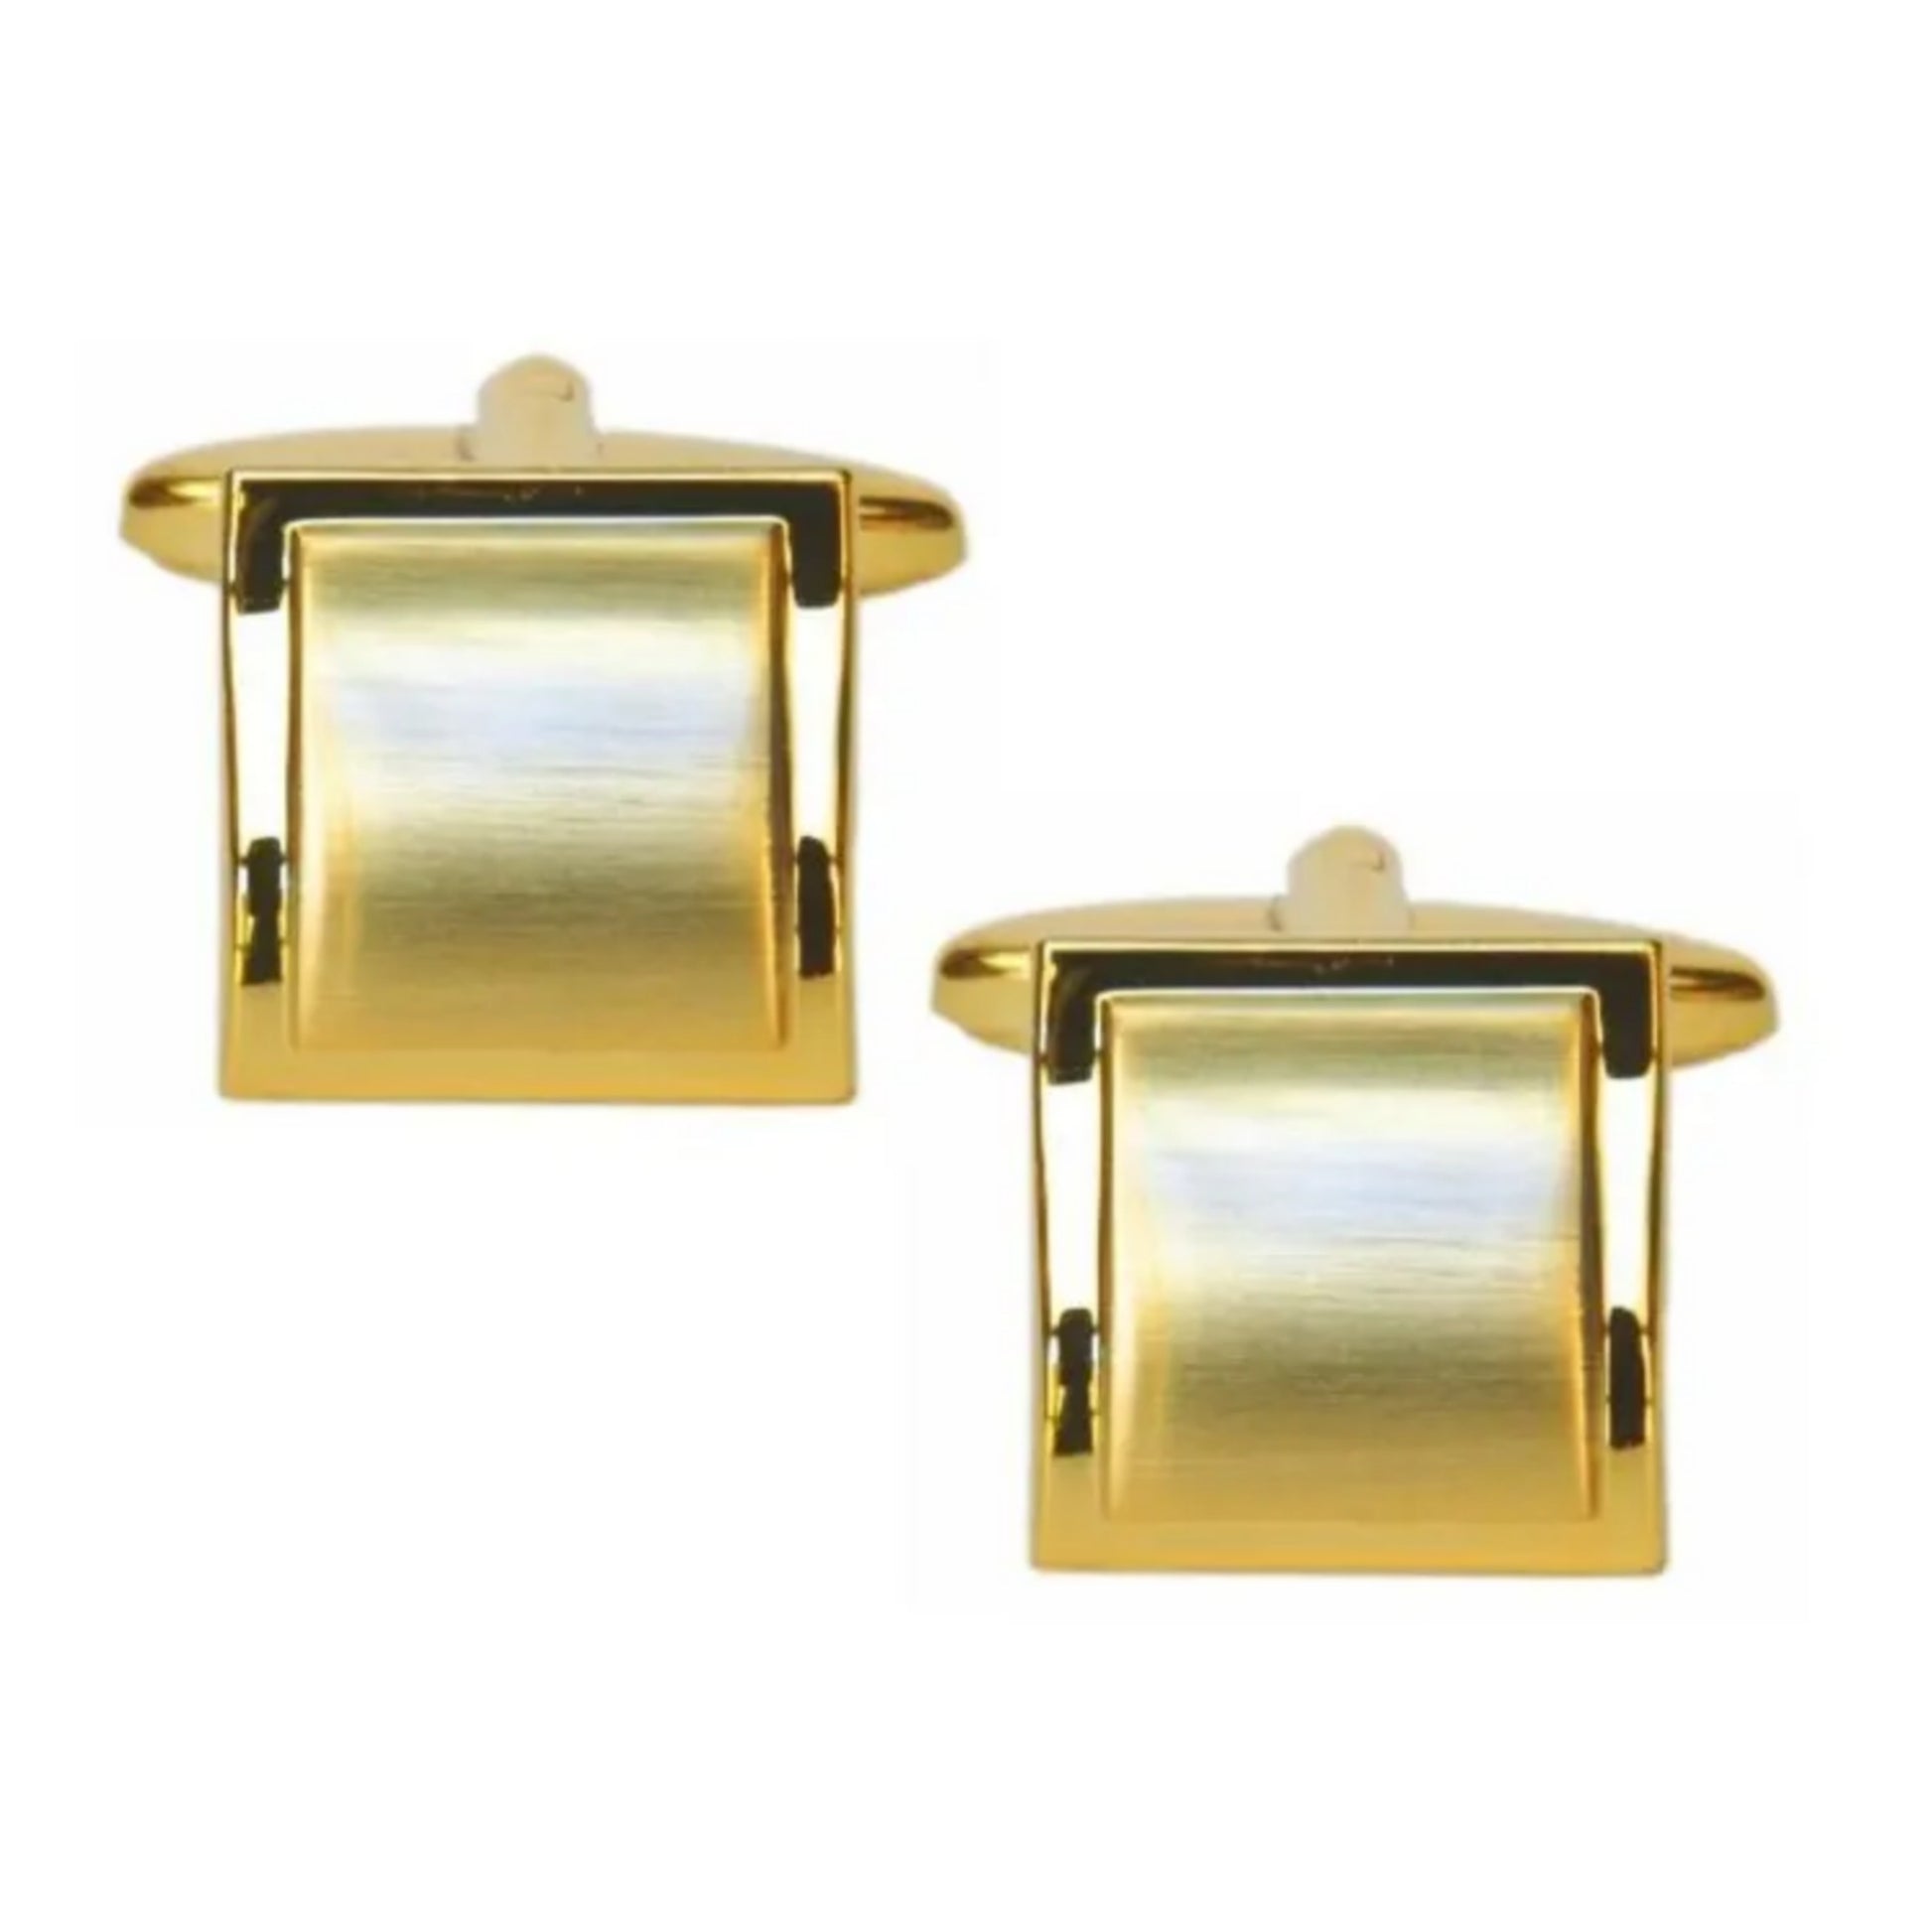 Shiny Edge Brushed Gold Plated Square Curved Cufflinks - HK Jewels